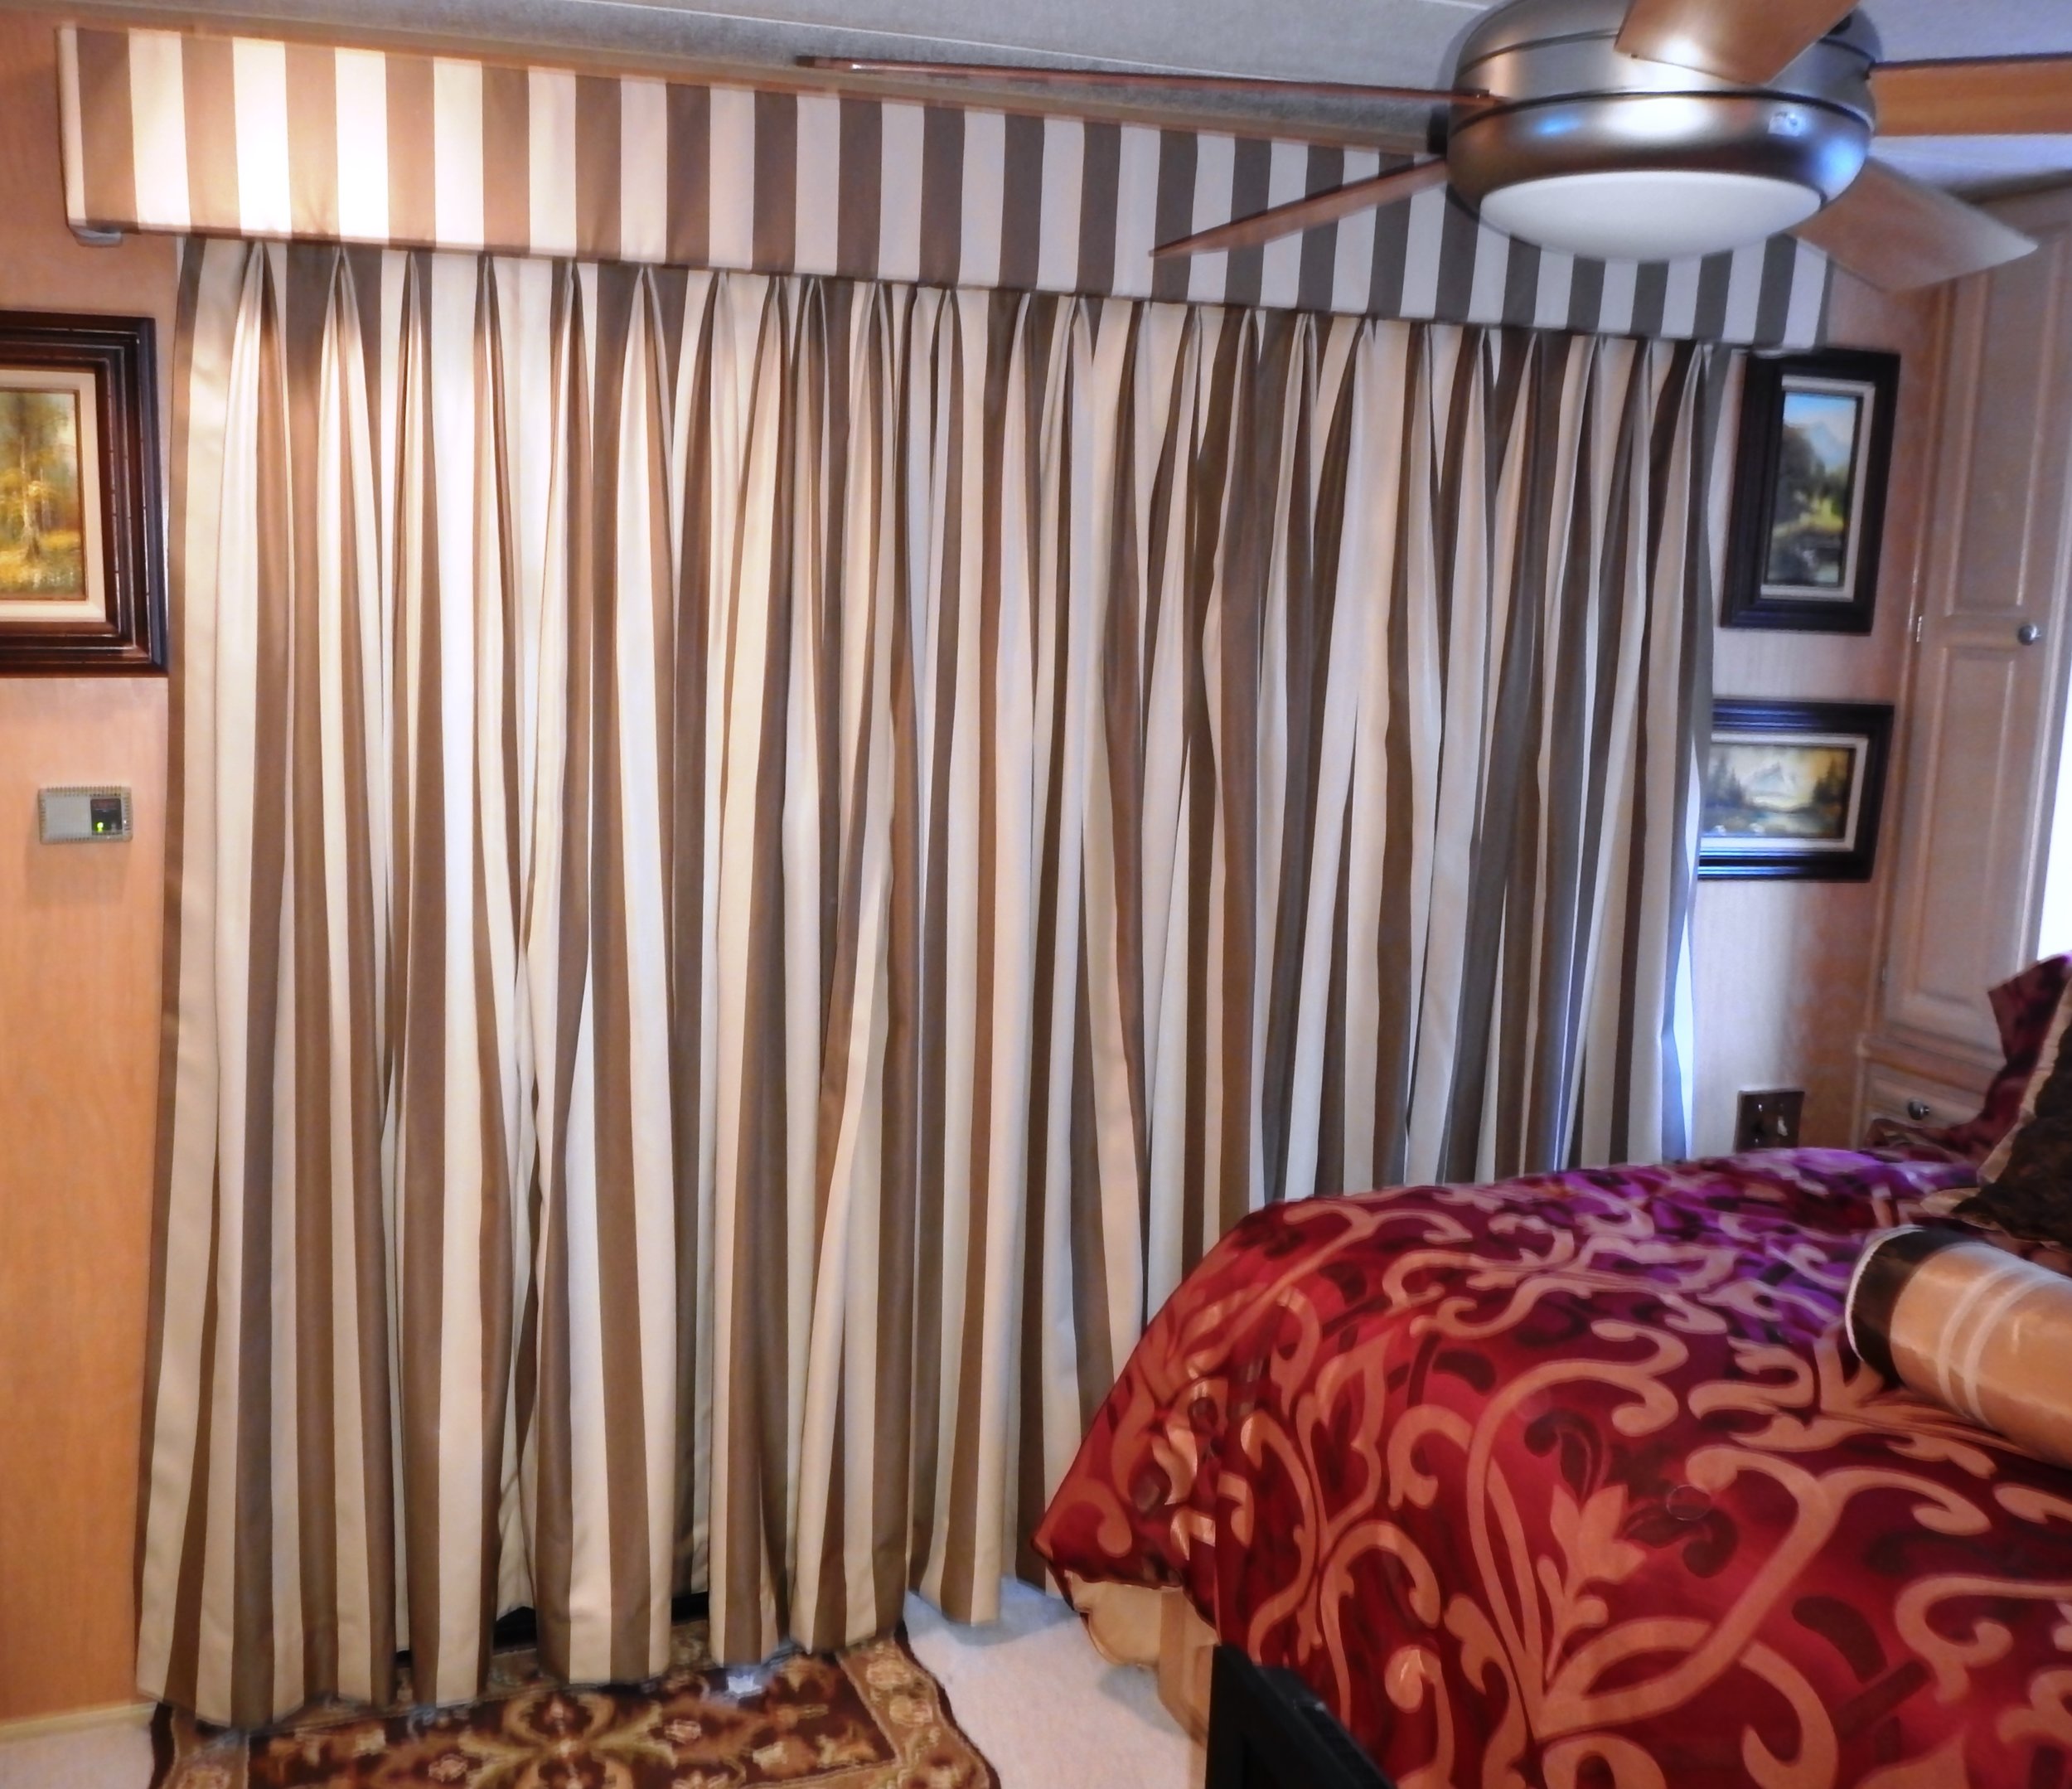 Drapes and Valance in Master.jpg